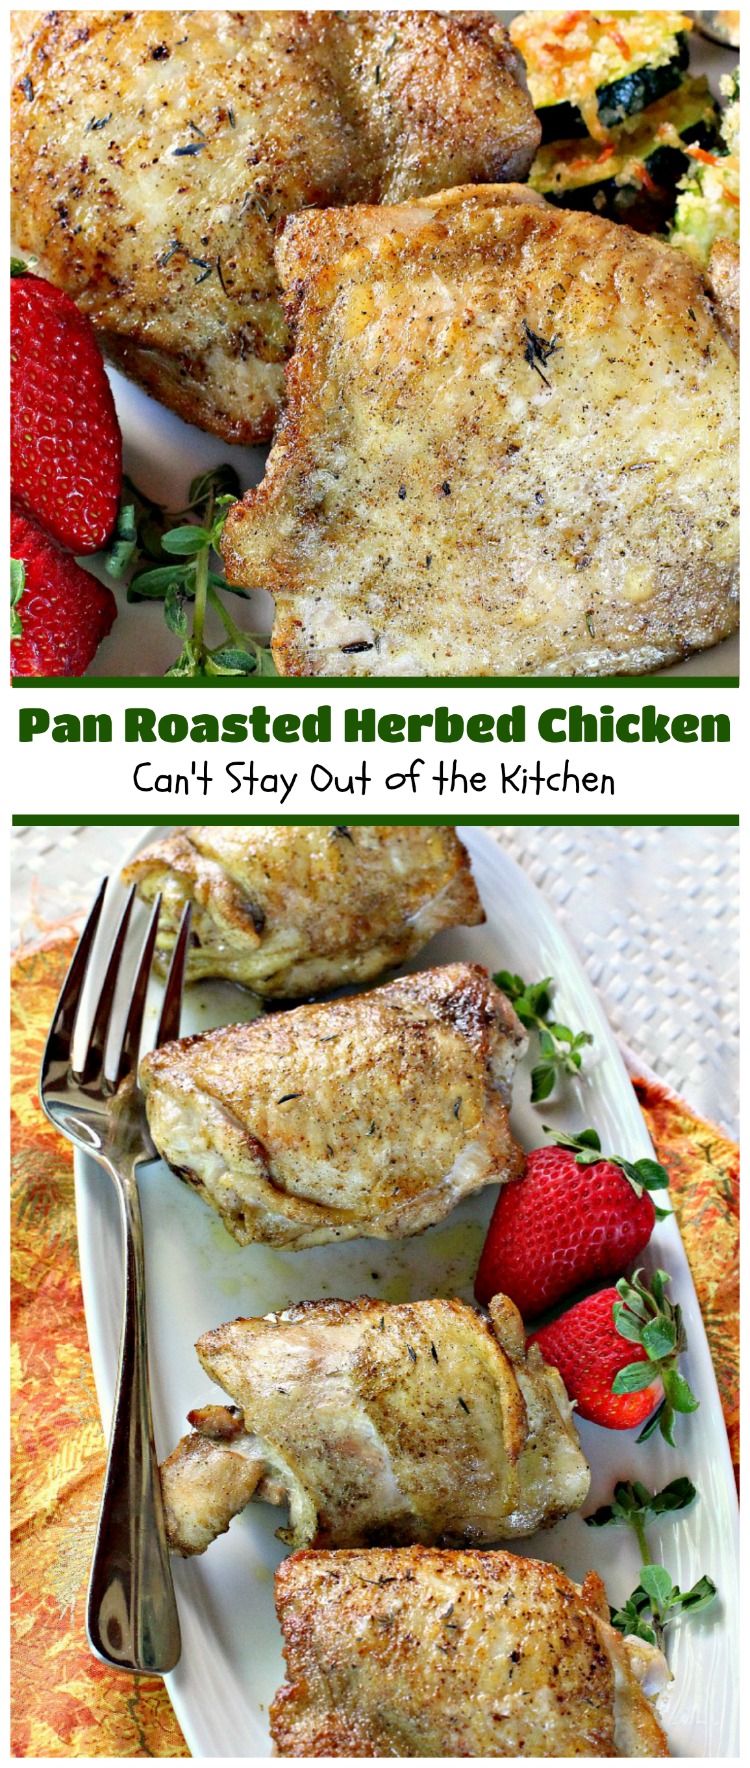 Pan Roasted Herbed Chicken | Can't Stay Out of the Kitchen | easy, simple & delectable #chicken entree that's healthy, low calorie and #glutenfree.